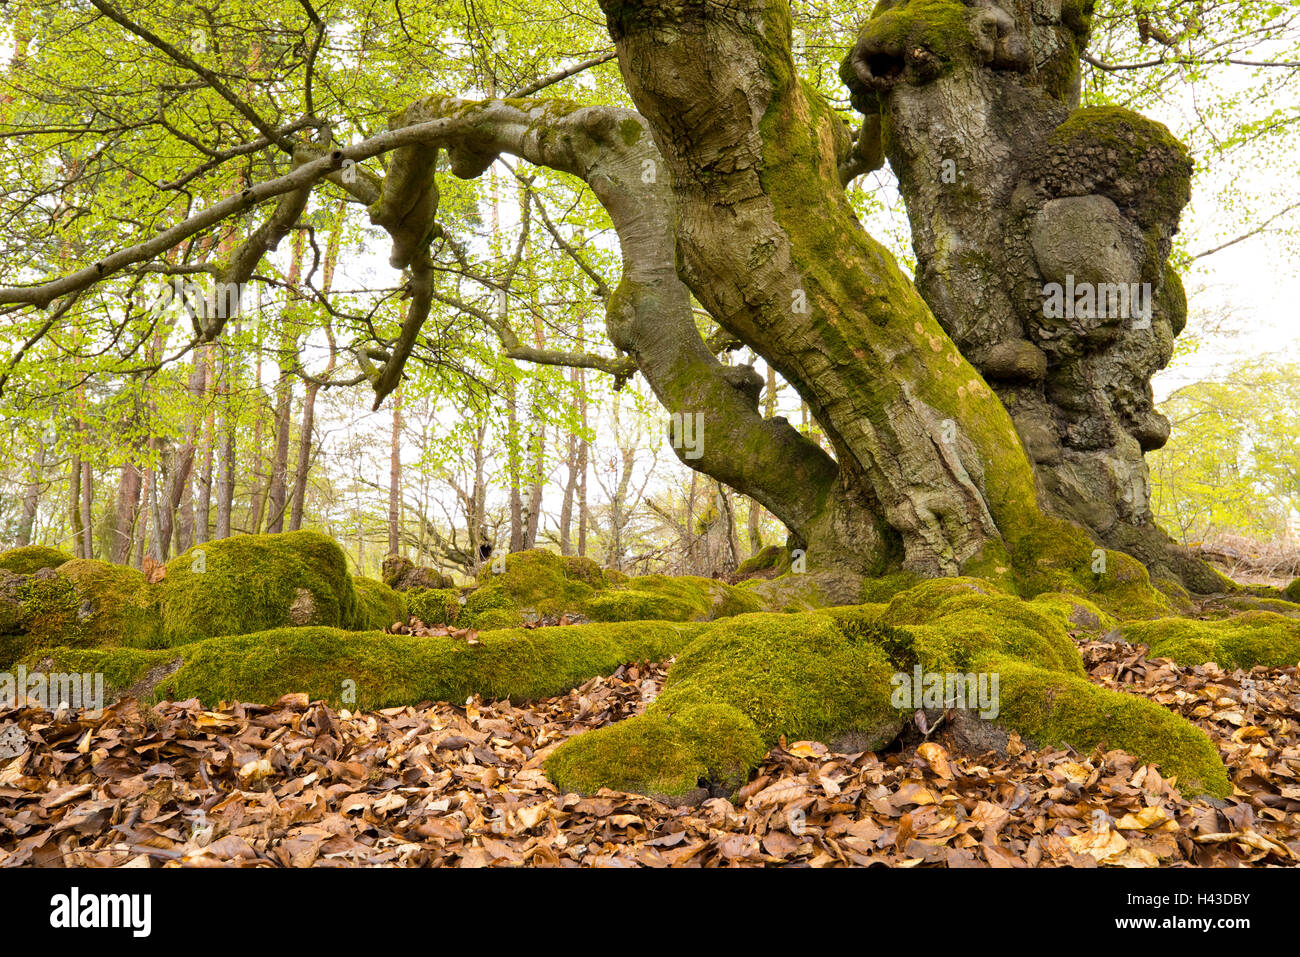 Old beeches (Fagus sylvatica) with mossy roots, Hutebuchen, Hutewald Halloh, Hesse, Germany Stock Photo